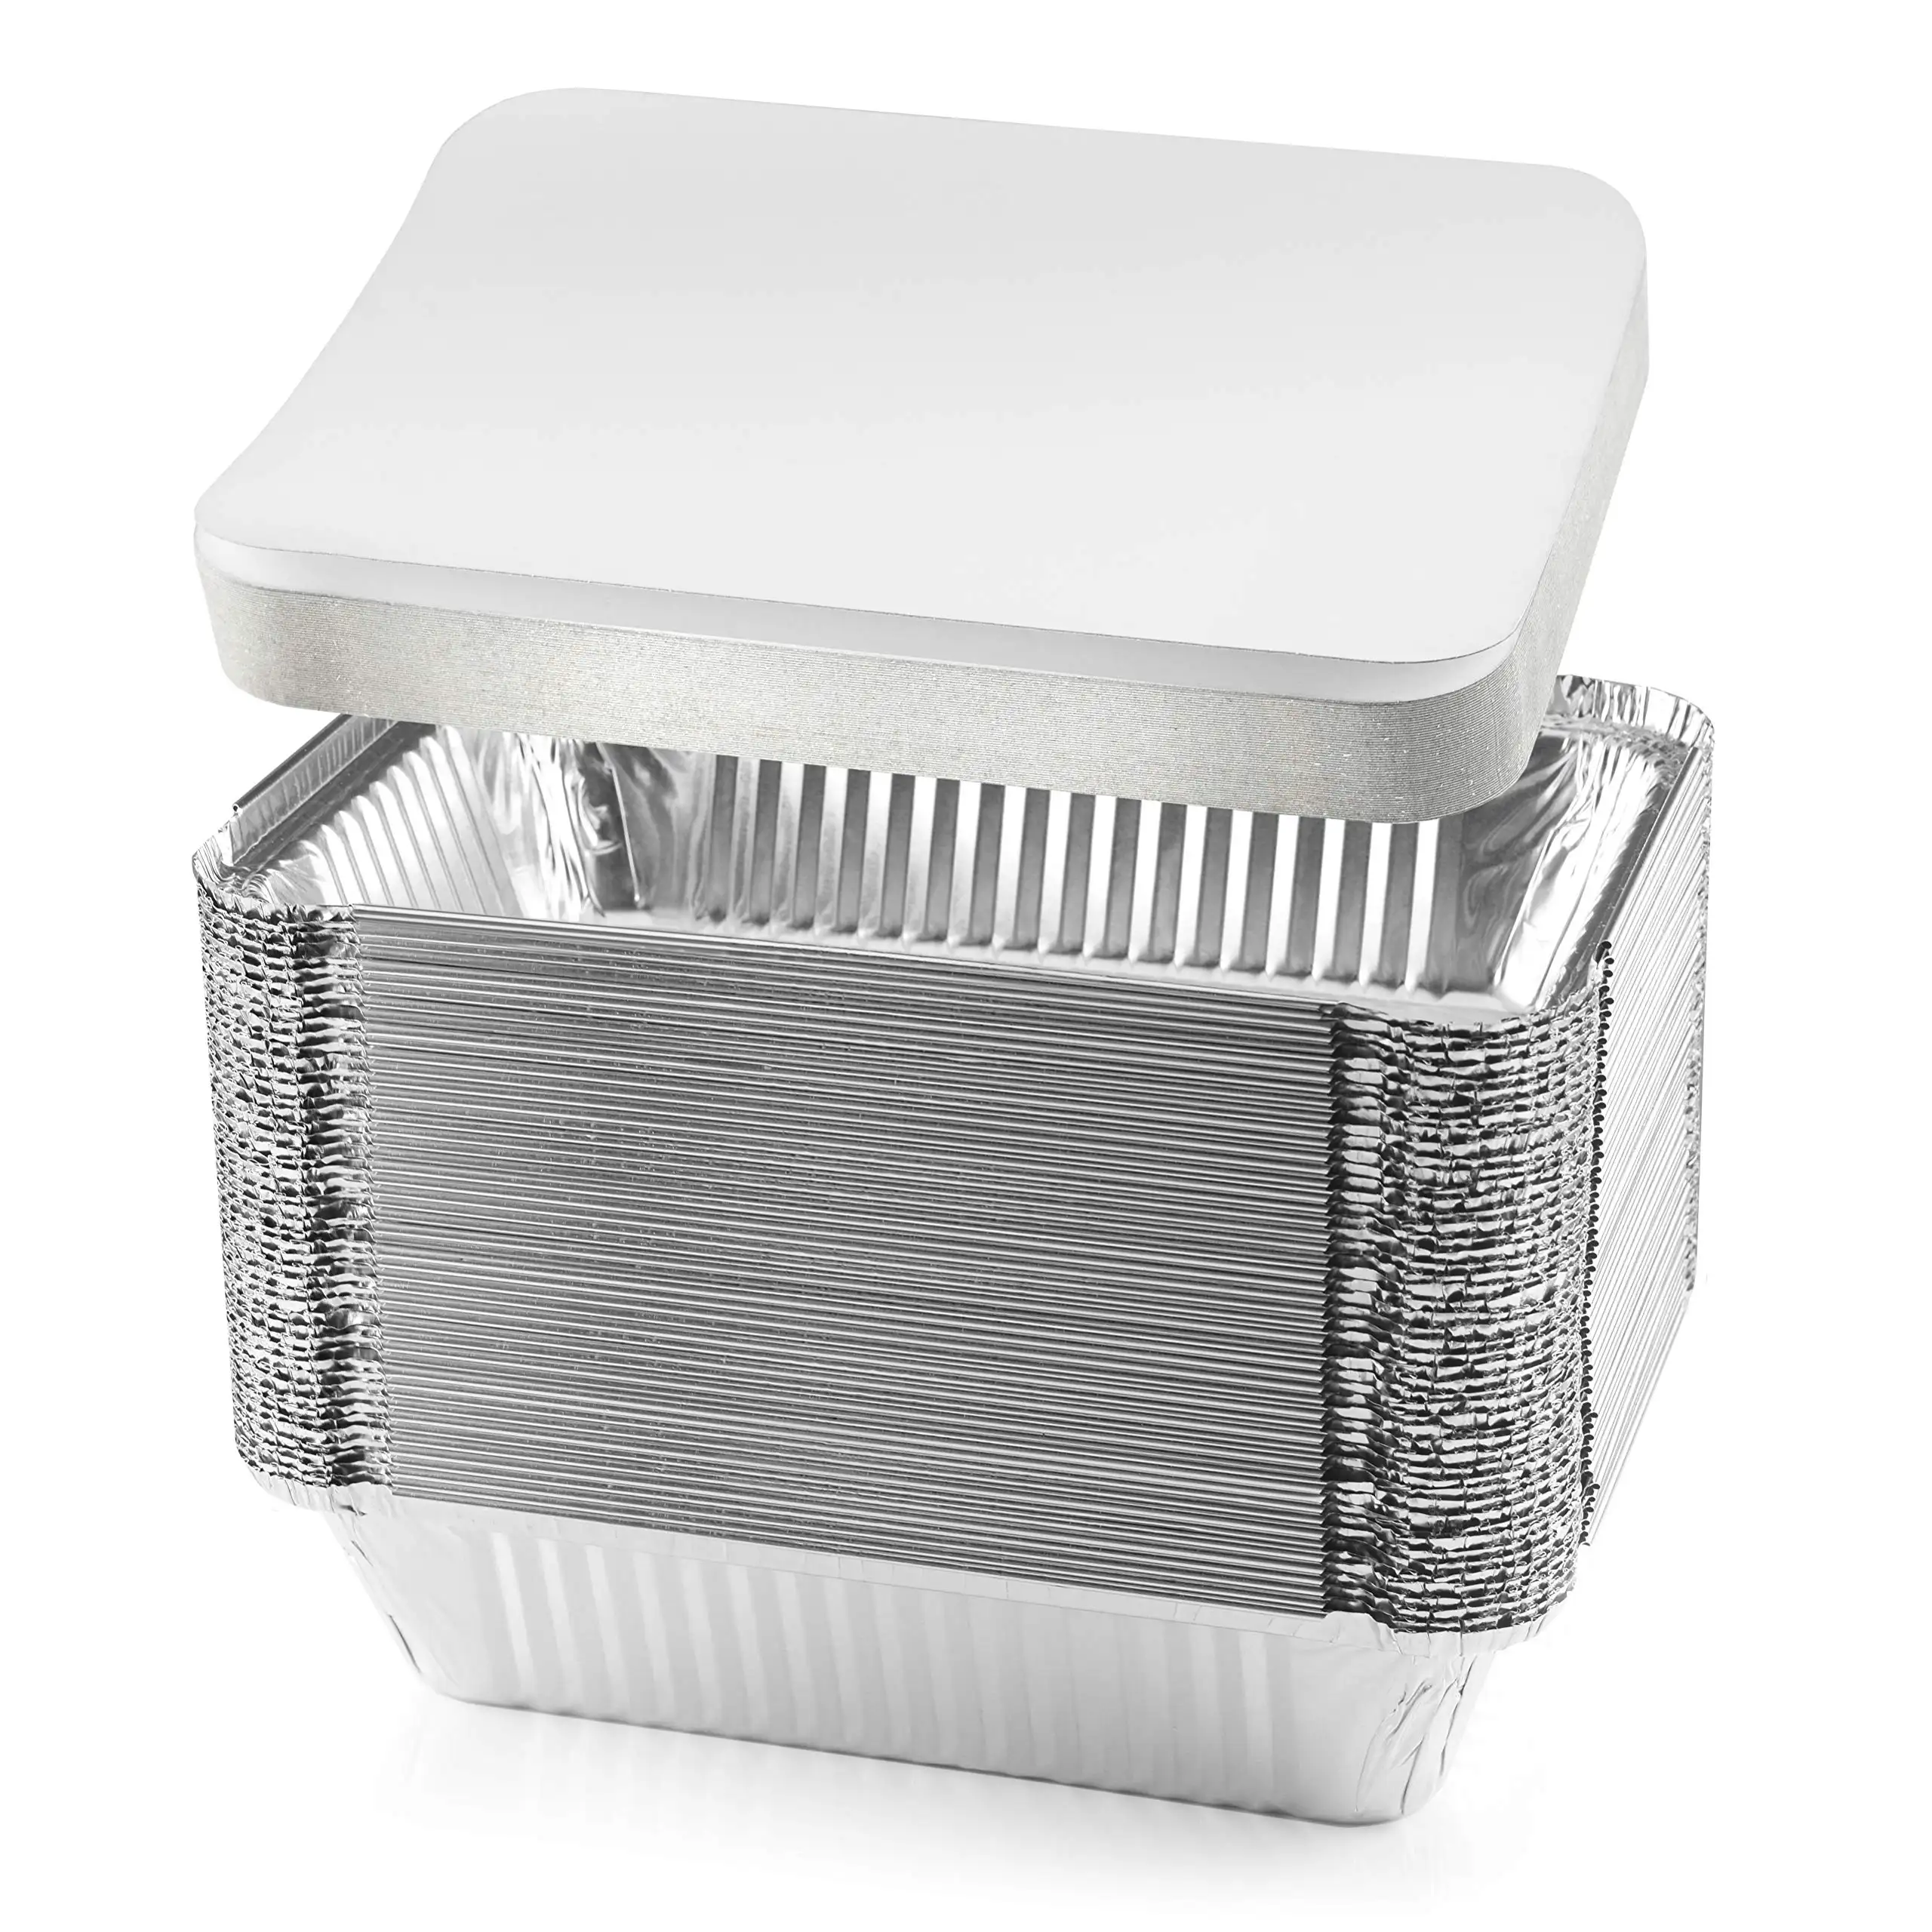 900ml 2lb Loaf Pan F2 Aluminium Container Foil Oblong with Paper Plastic Lid for Food Packing